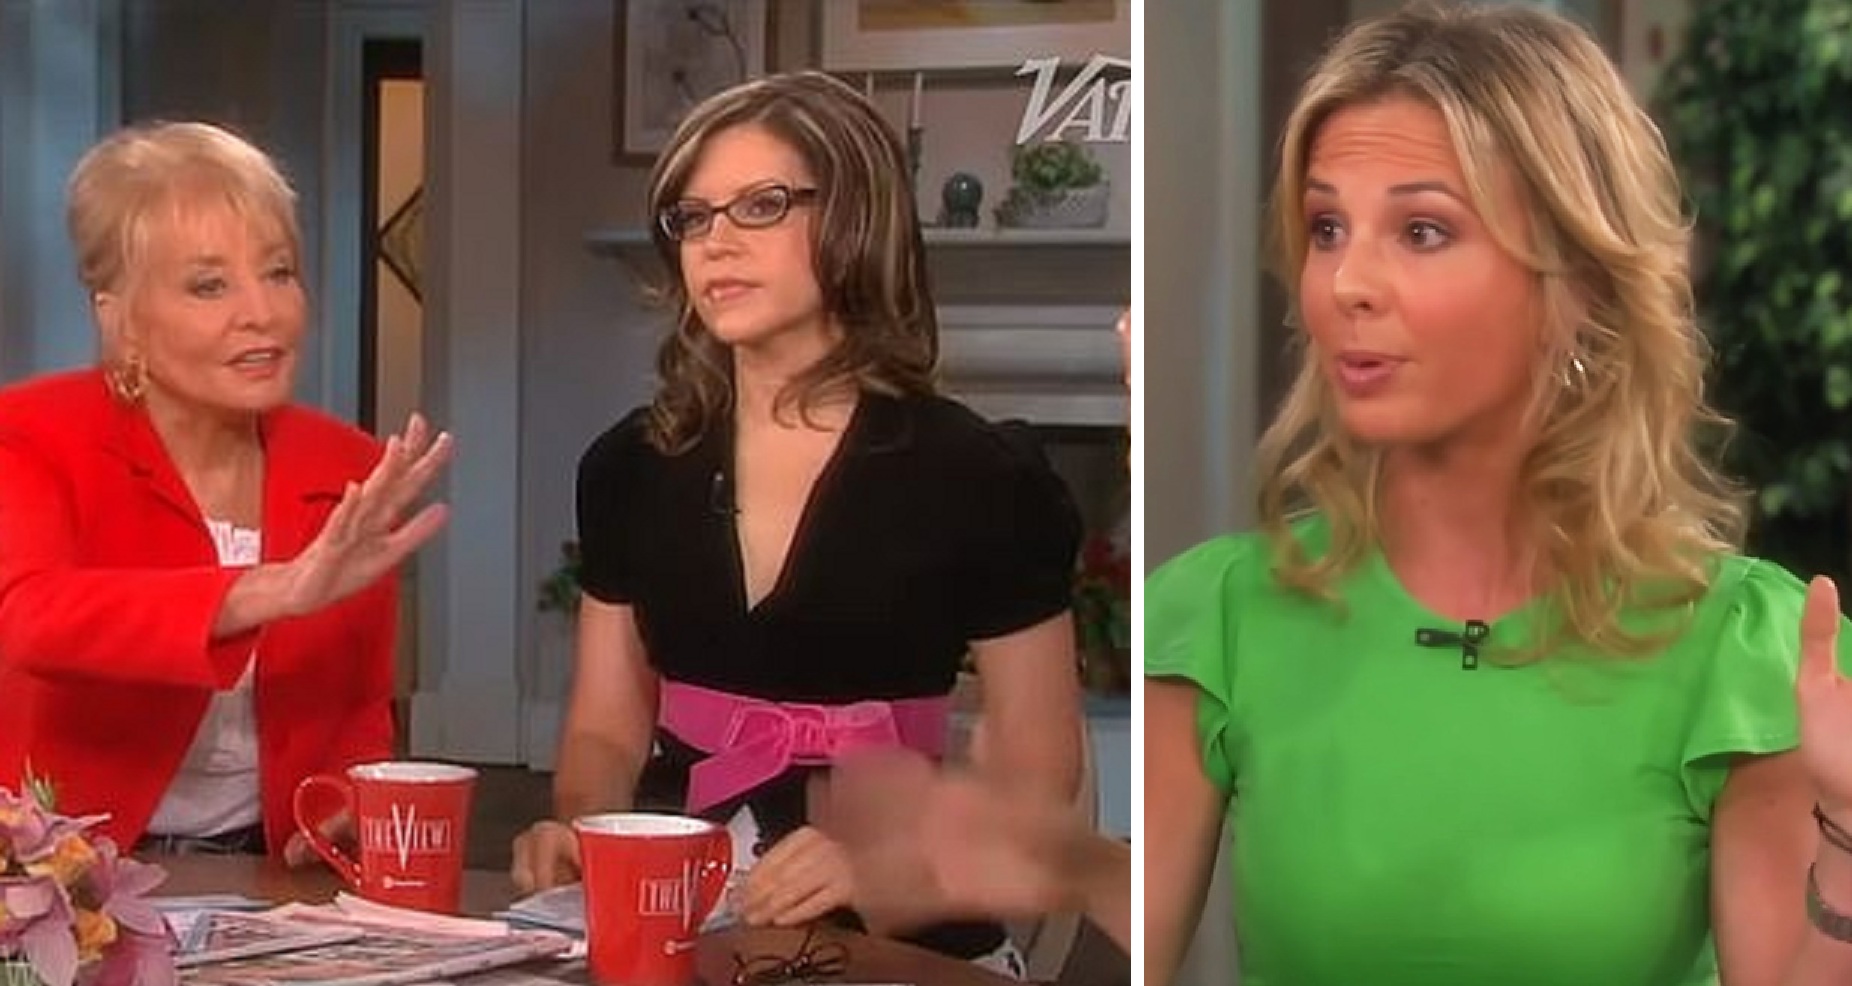 EXPLOSIVE Leaked Audio From The View Shows Elisabeth Hasselbeck Threatening To Quit The Show After Fight With Barbara Walters!